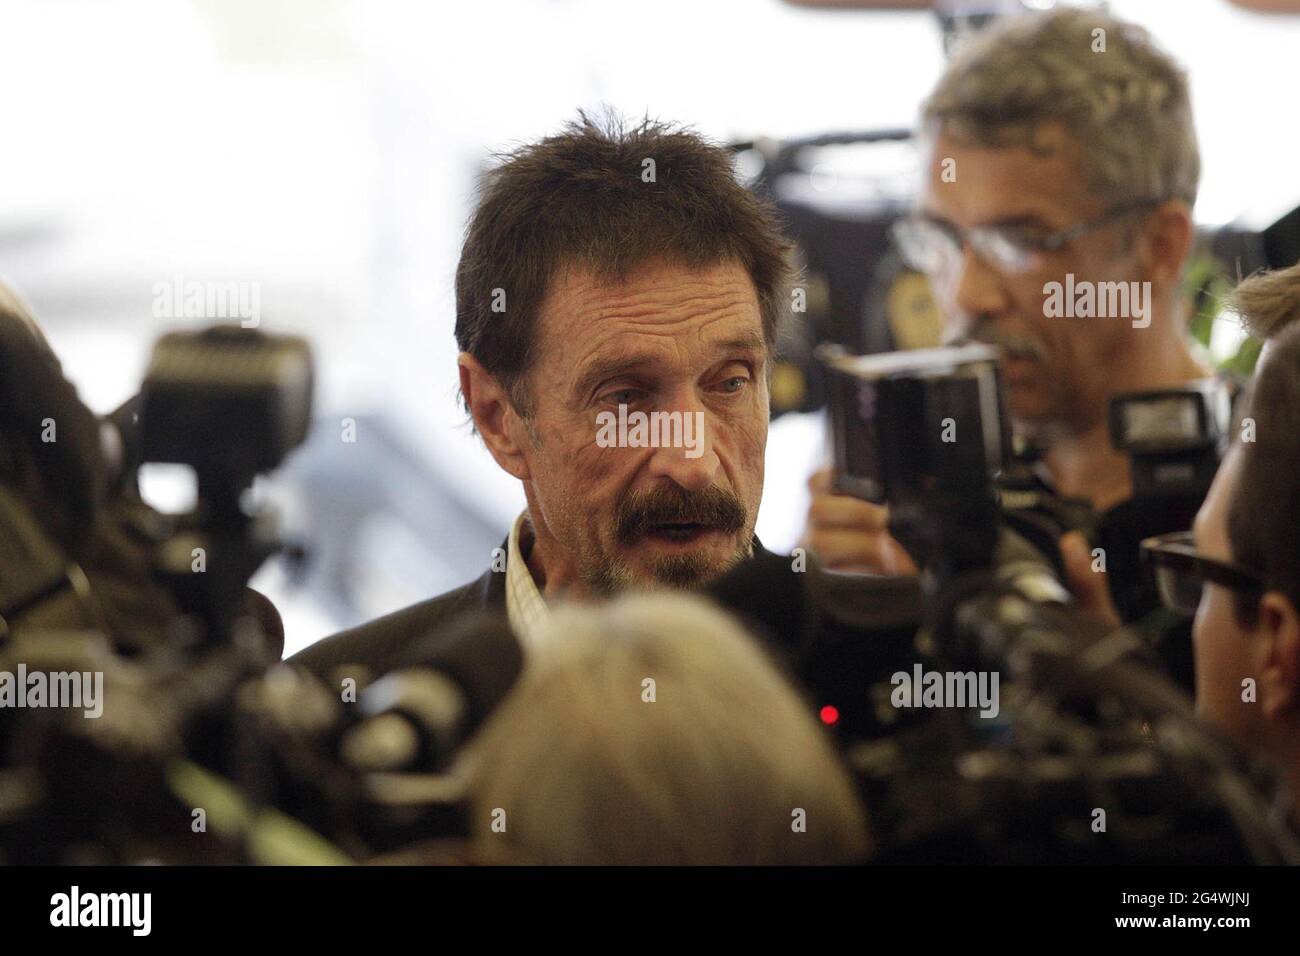 Miami, USA. 13th Dec, 2012. John McAfee speaks to the Miami media outside the Beacon Hotel in Miami, Florida, on December 13, 2012. John McAfee, the controversial guru of computer anti-virus software, denied Thursday in Miami Beach that he's been interviewed by Internal Revenue Service and FBI agents after arriving the previous night following deportation from Guatemala. (Photo by C.M. Guerrero/Miami Herald/MCT/Sipa USA) Credit: Sipa USA/Alamy Live News Stock Photo